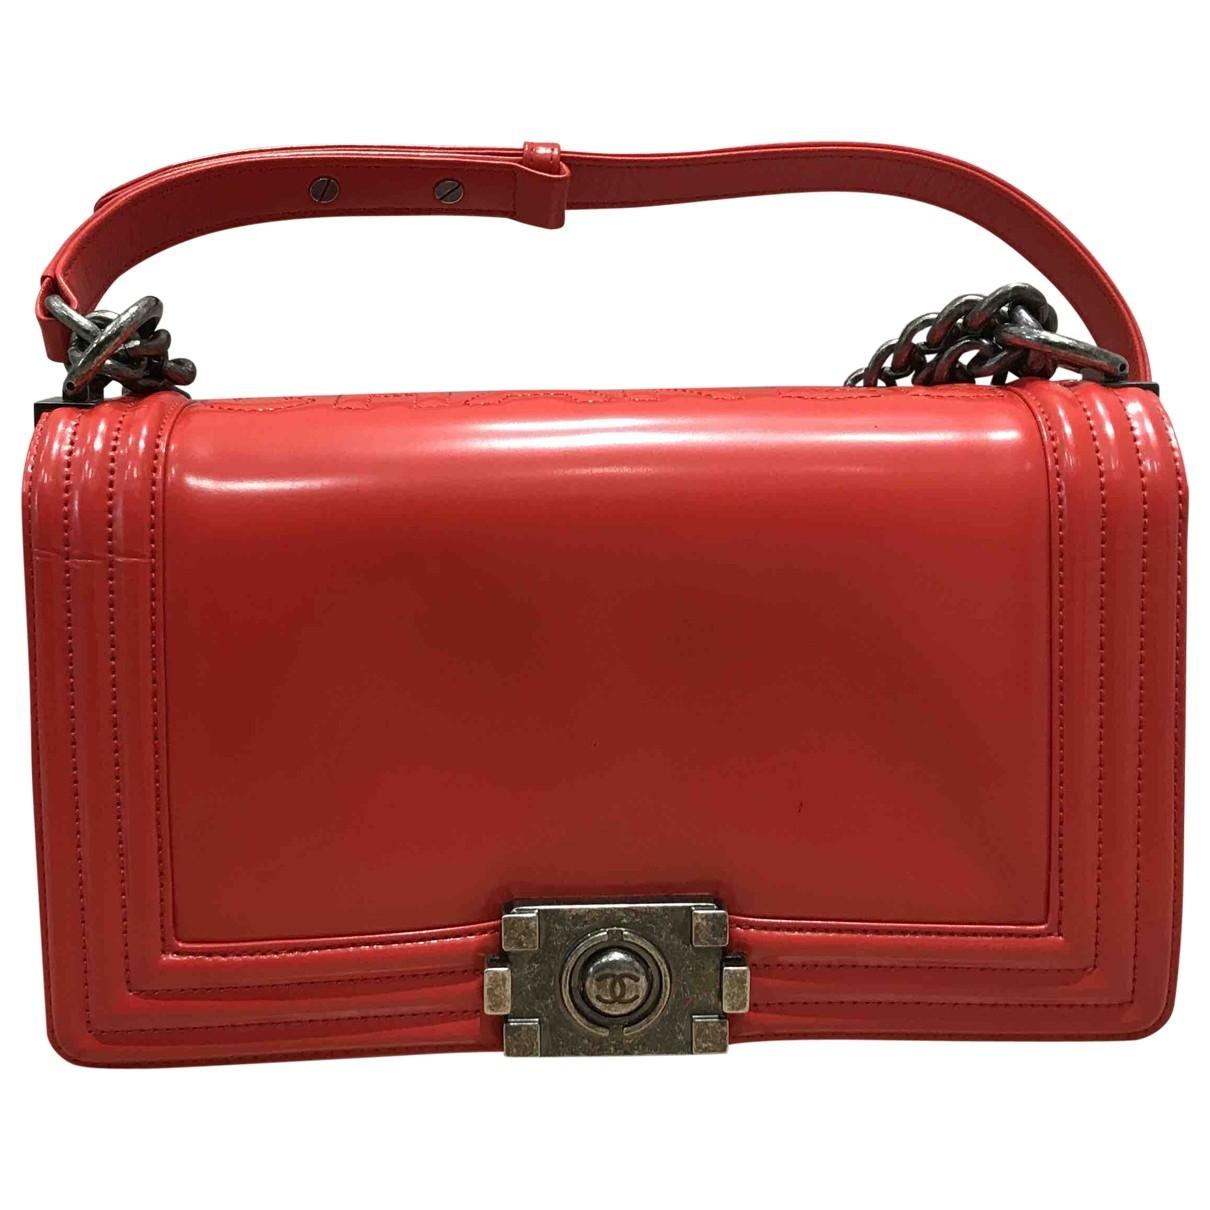 Chanel Boy Red Patent Leather Handbag in Red - Lyst